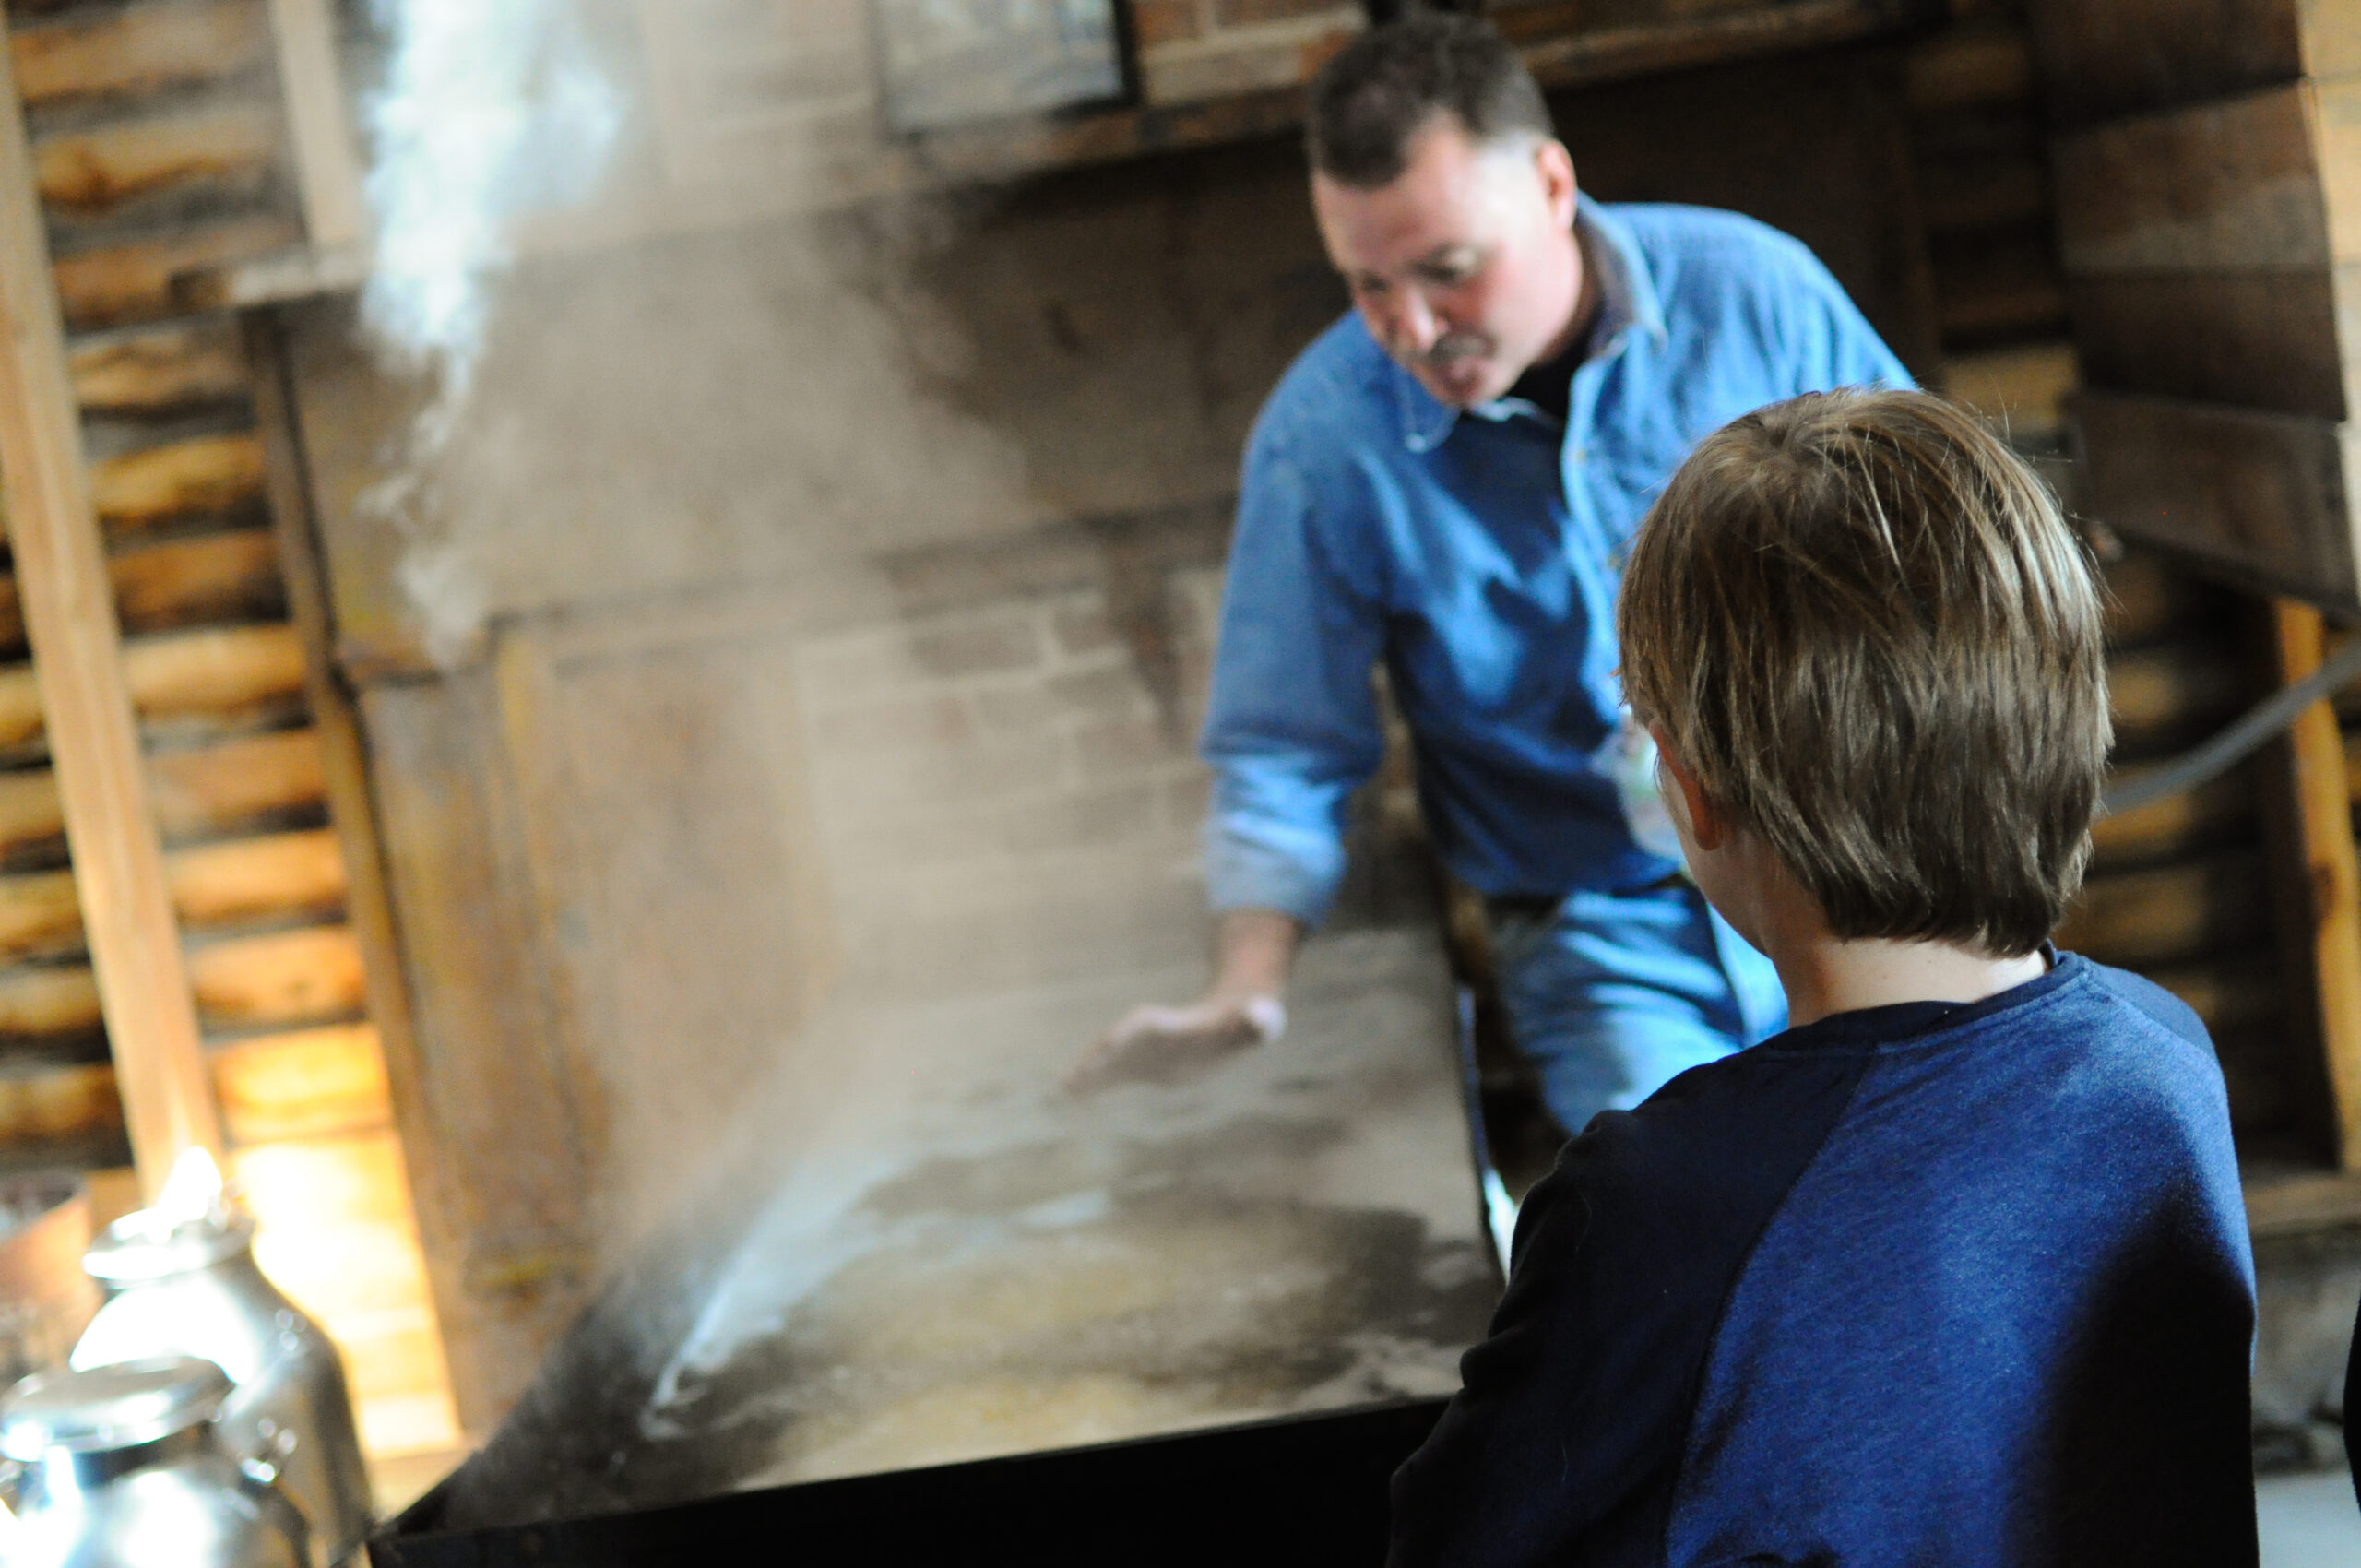 Photo of a man making maple syrup with a child watching.